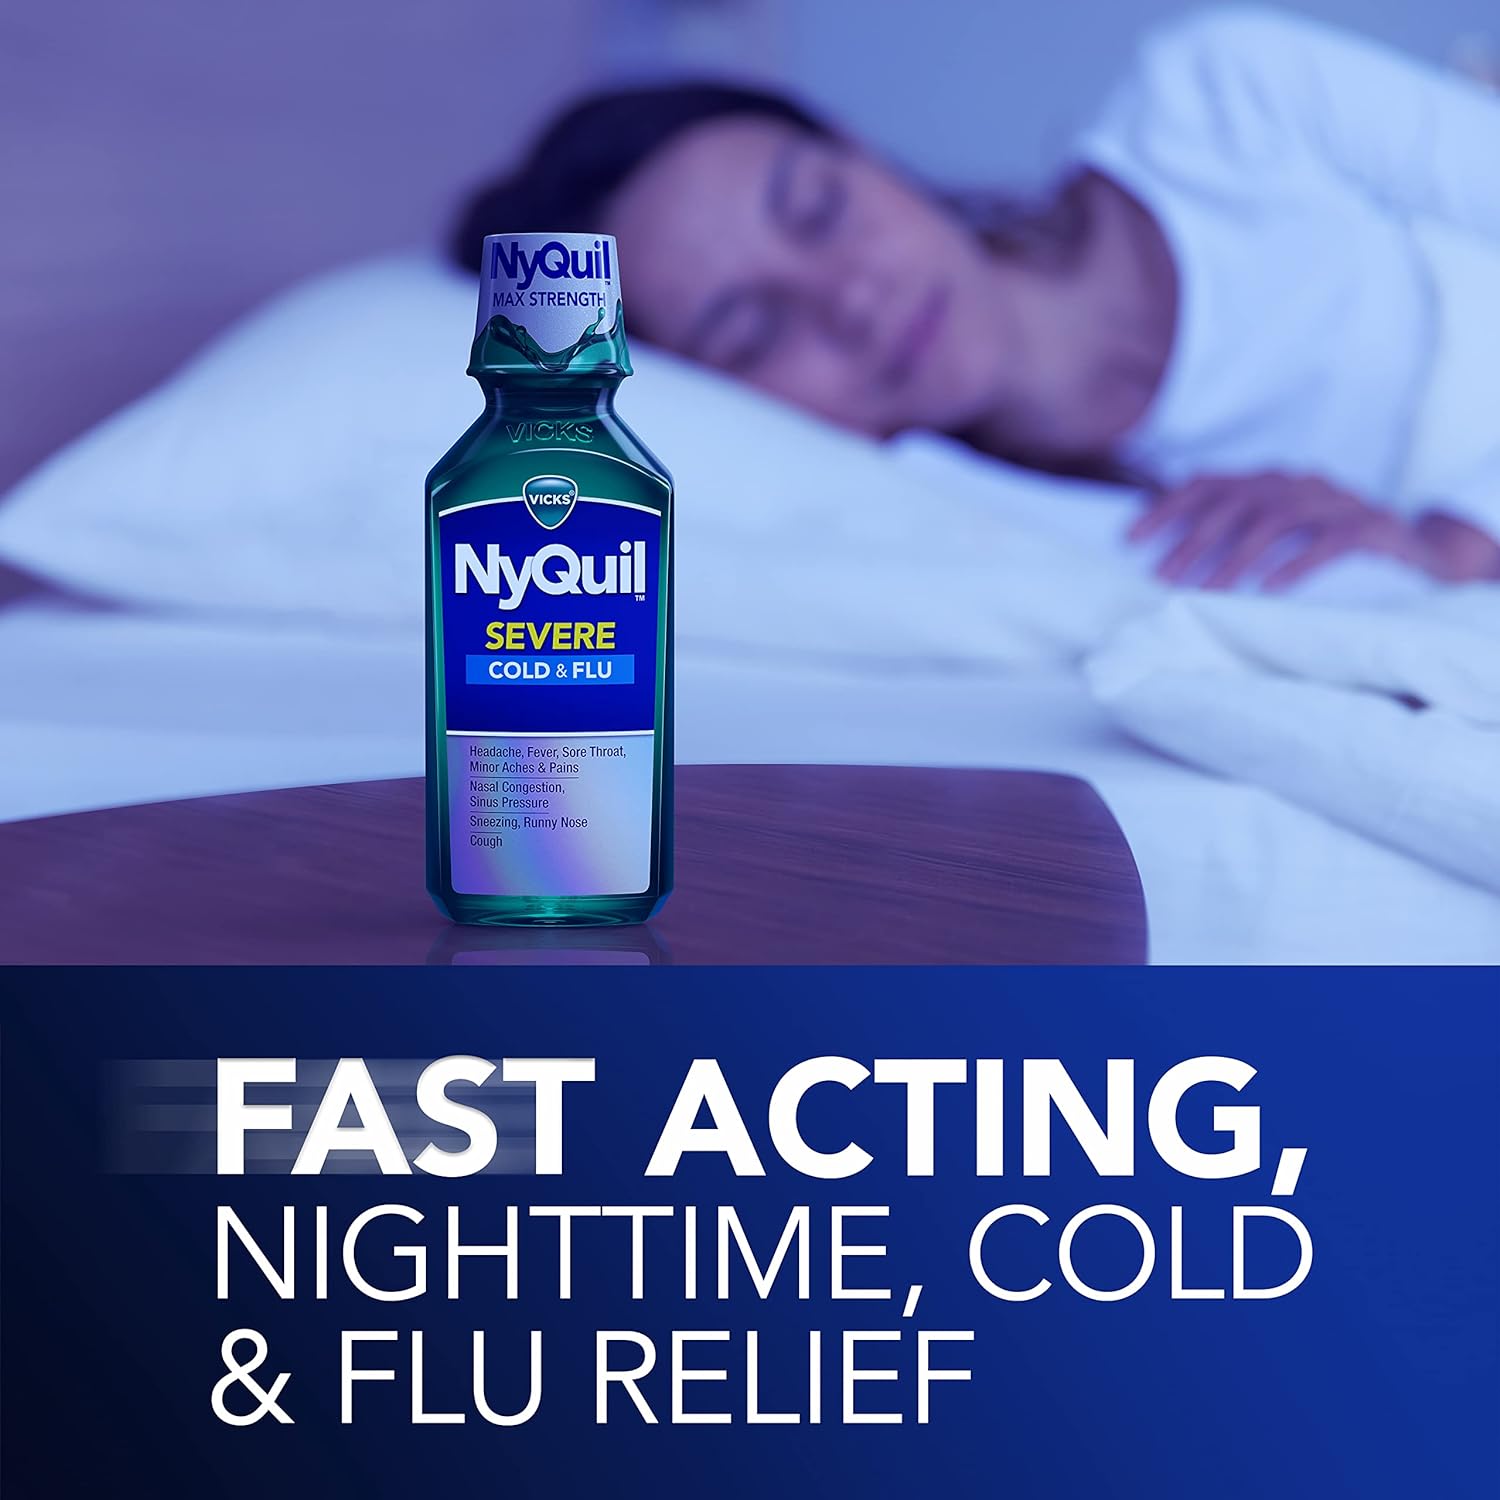 Vicks NyQuil SEVERE Cold and Flu Relief Liquid Medicine, Maximum Strength, 9-Symptom Nighttime Relief For Headache, Fever, Sore Throat, Nasal Congestion, Sinus Pressure, Runny Nose, Cough, 8 FL OZ : Health & Household